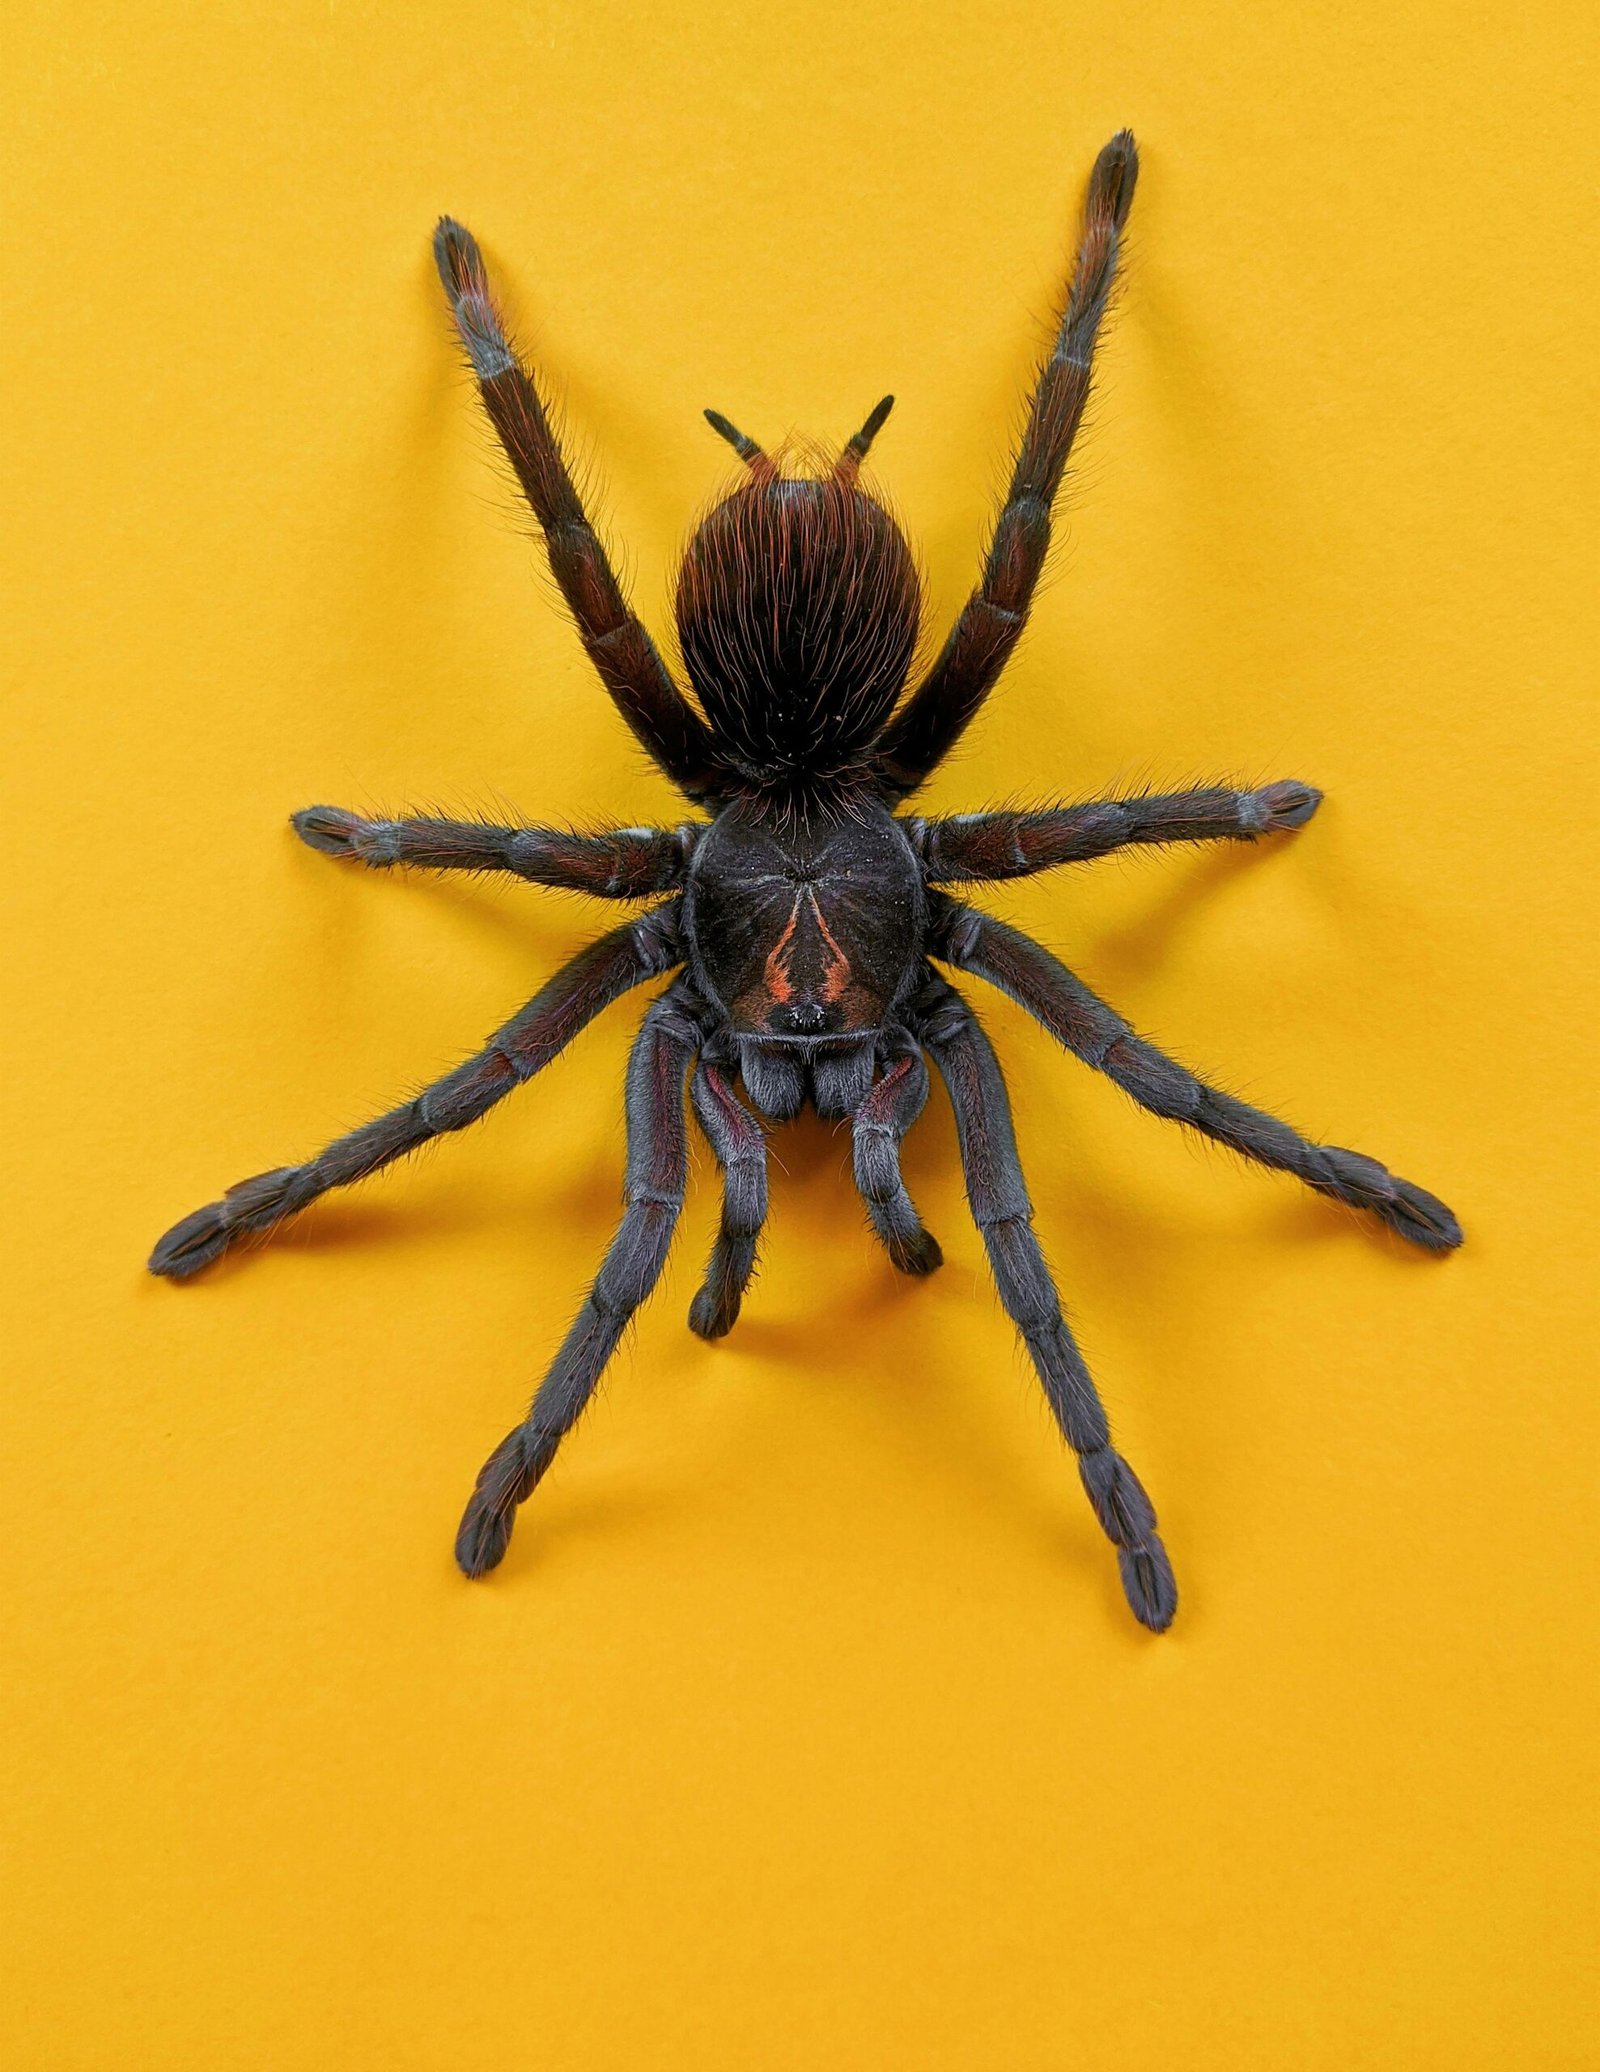 What Are The Fascinating Characteristics Of The Indian Violet Tarantula, And How Is It Best Cared For As A Pet?